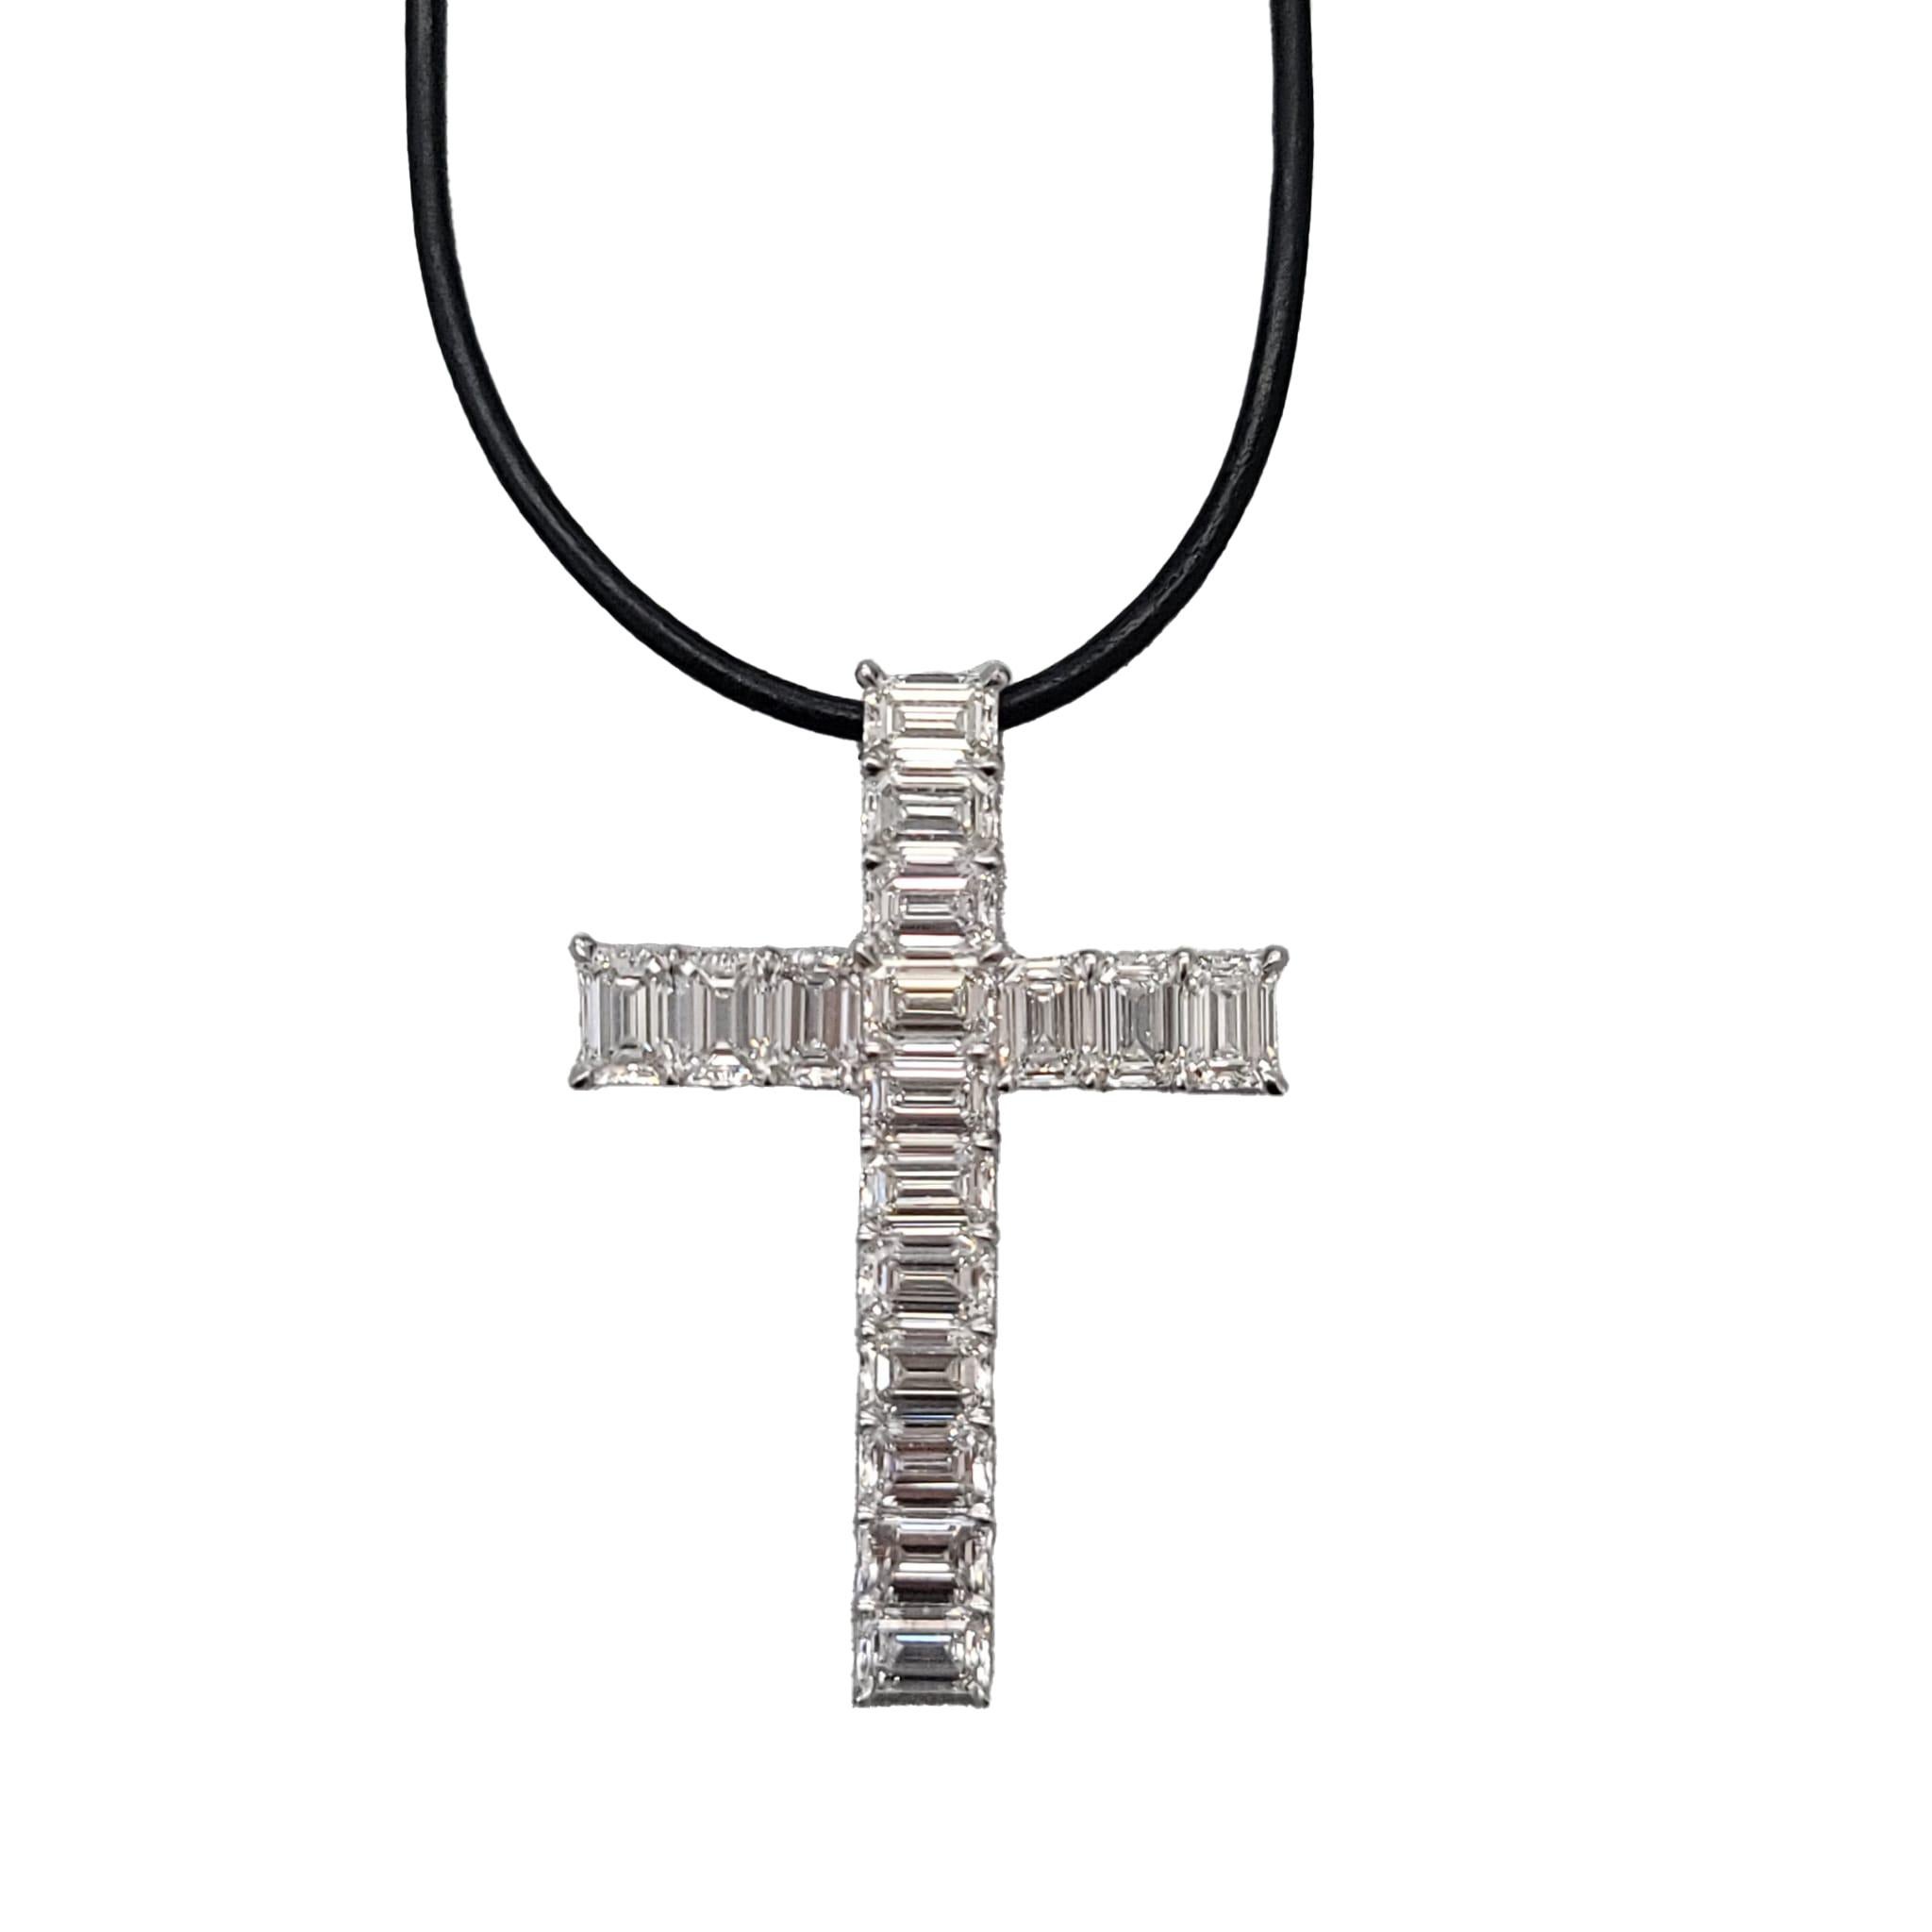  Diamond and Platinum Cross This diamond cross has 17 emerald cut diamonds weight 12.47 carats (Color: D-F,
Clarity: VVS1-VS2, GIA Certified) all set in platinum with adjustable leather cord. Measurements:
49mm x 34mm 